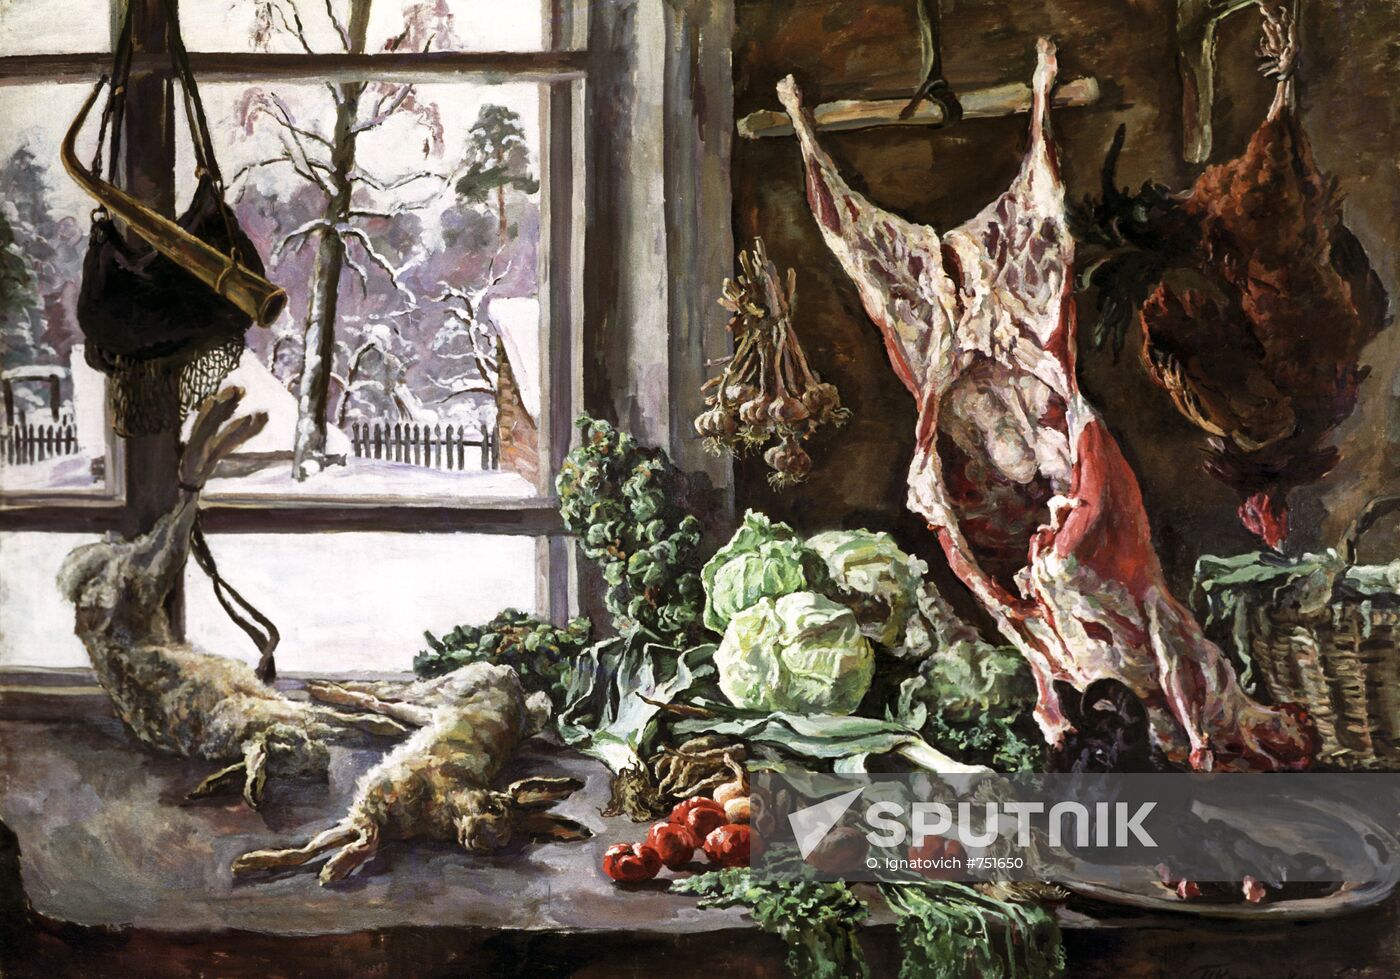 'Meat, Poultry and Brussels Sprouts Against A Window'